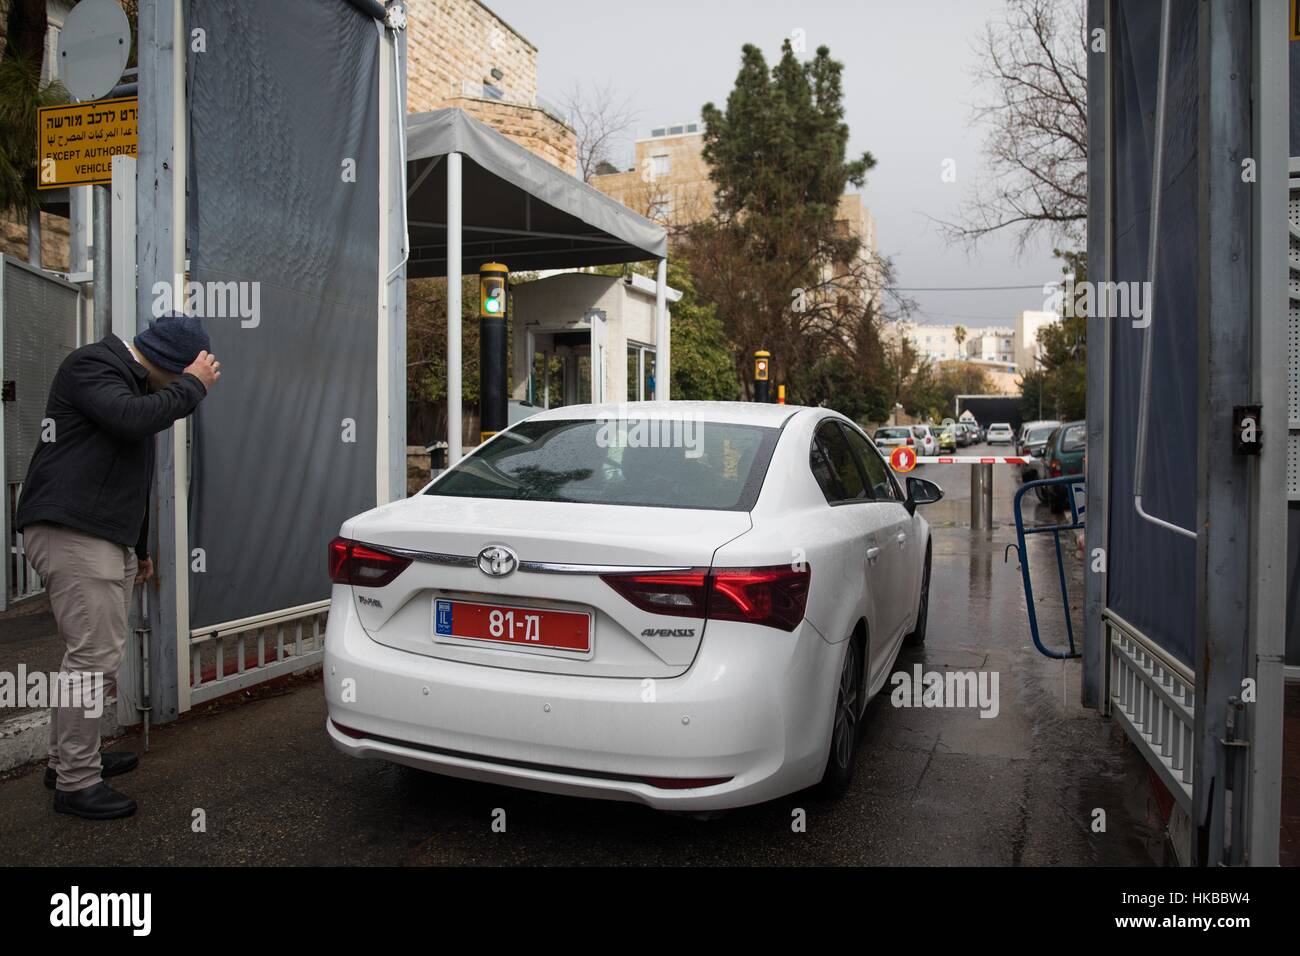 Jerusalem, Israel. 27th Jan, 2017. Police investigators arrive at the entrance to Israeli Prime Minister Benjamin Netanyahu's residence in Jerusalem.  Israeli Prime Minister Benjamin Netanyahu is being investigated by the National Fraud Unit for the third time. Credit: JINI/Xinhua/Alamy Live News Stock Photo